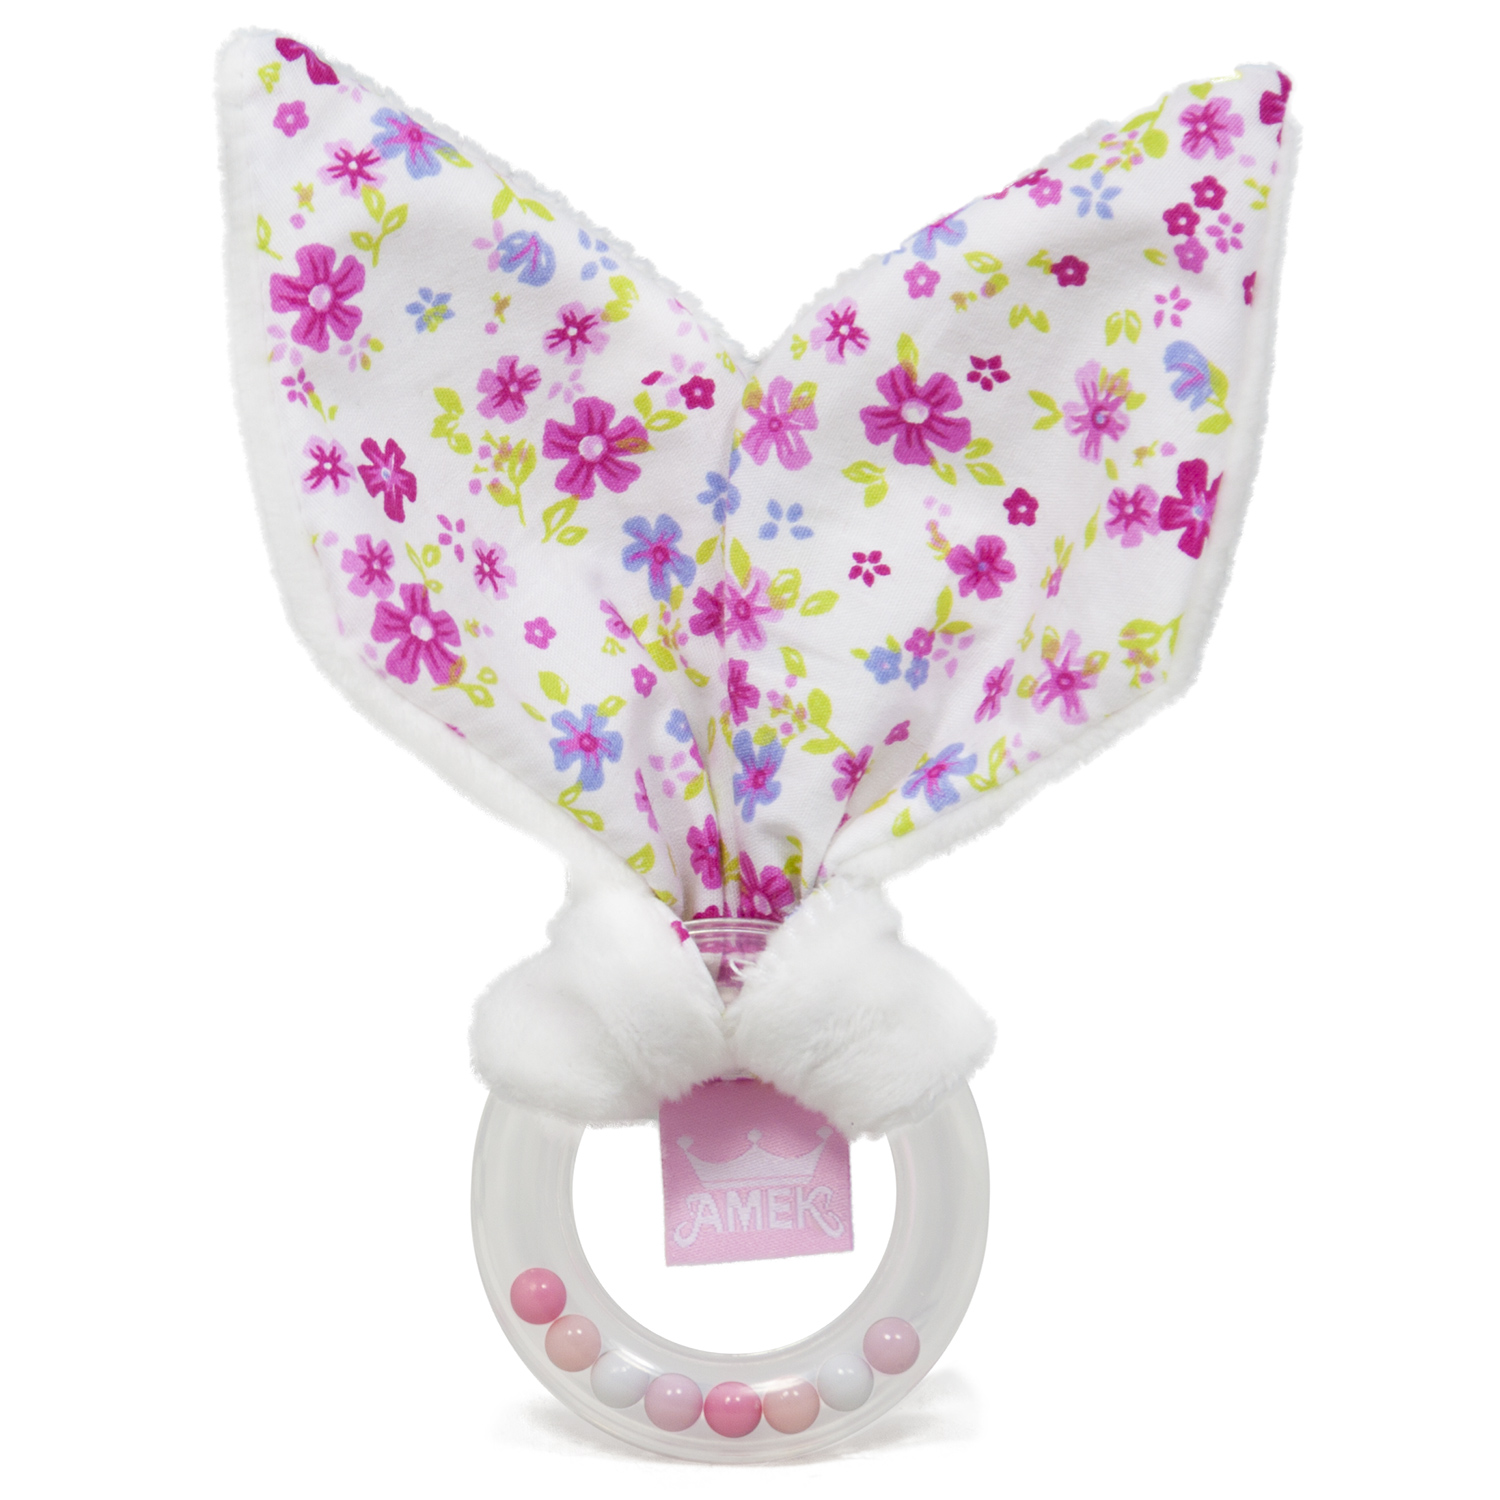 Baby rattle with rabbit ears - Pink